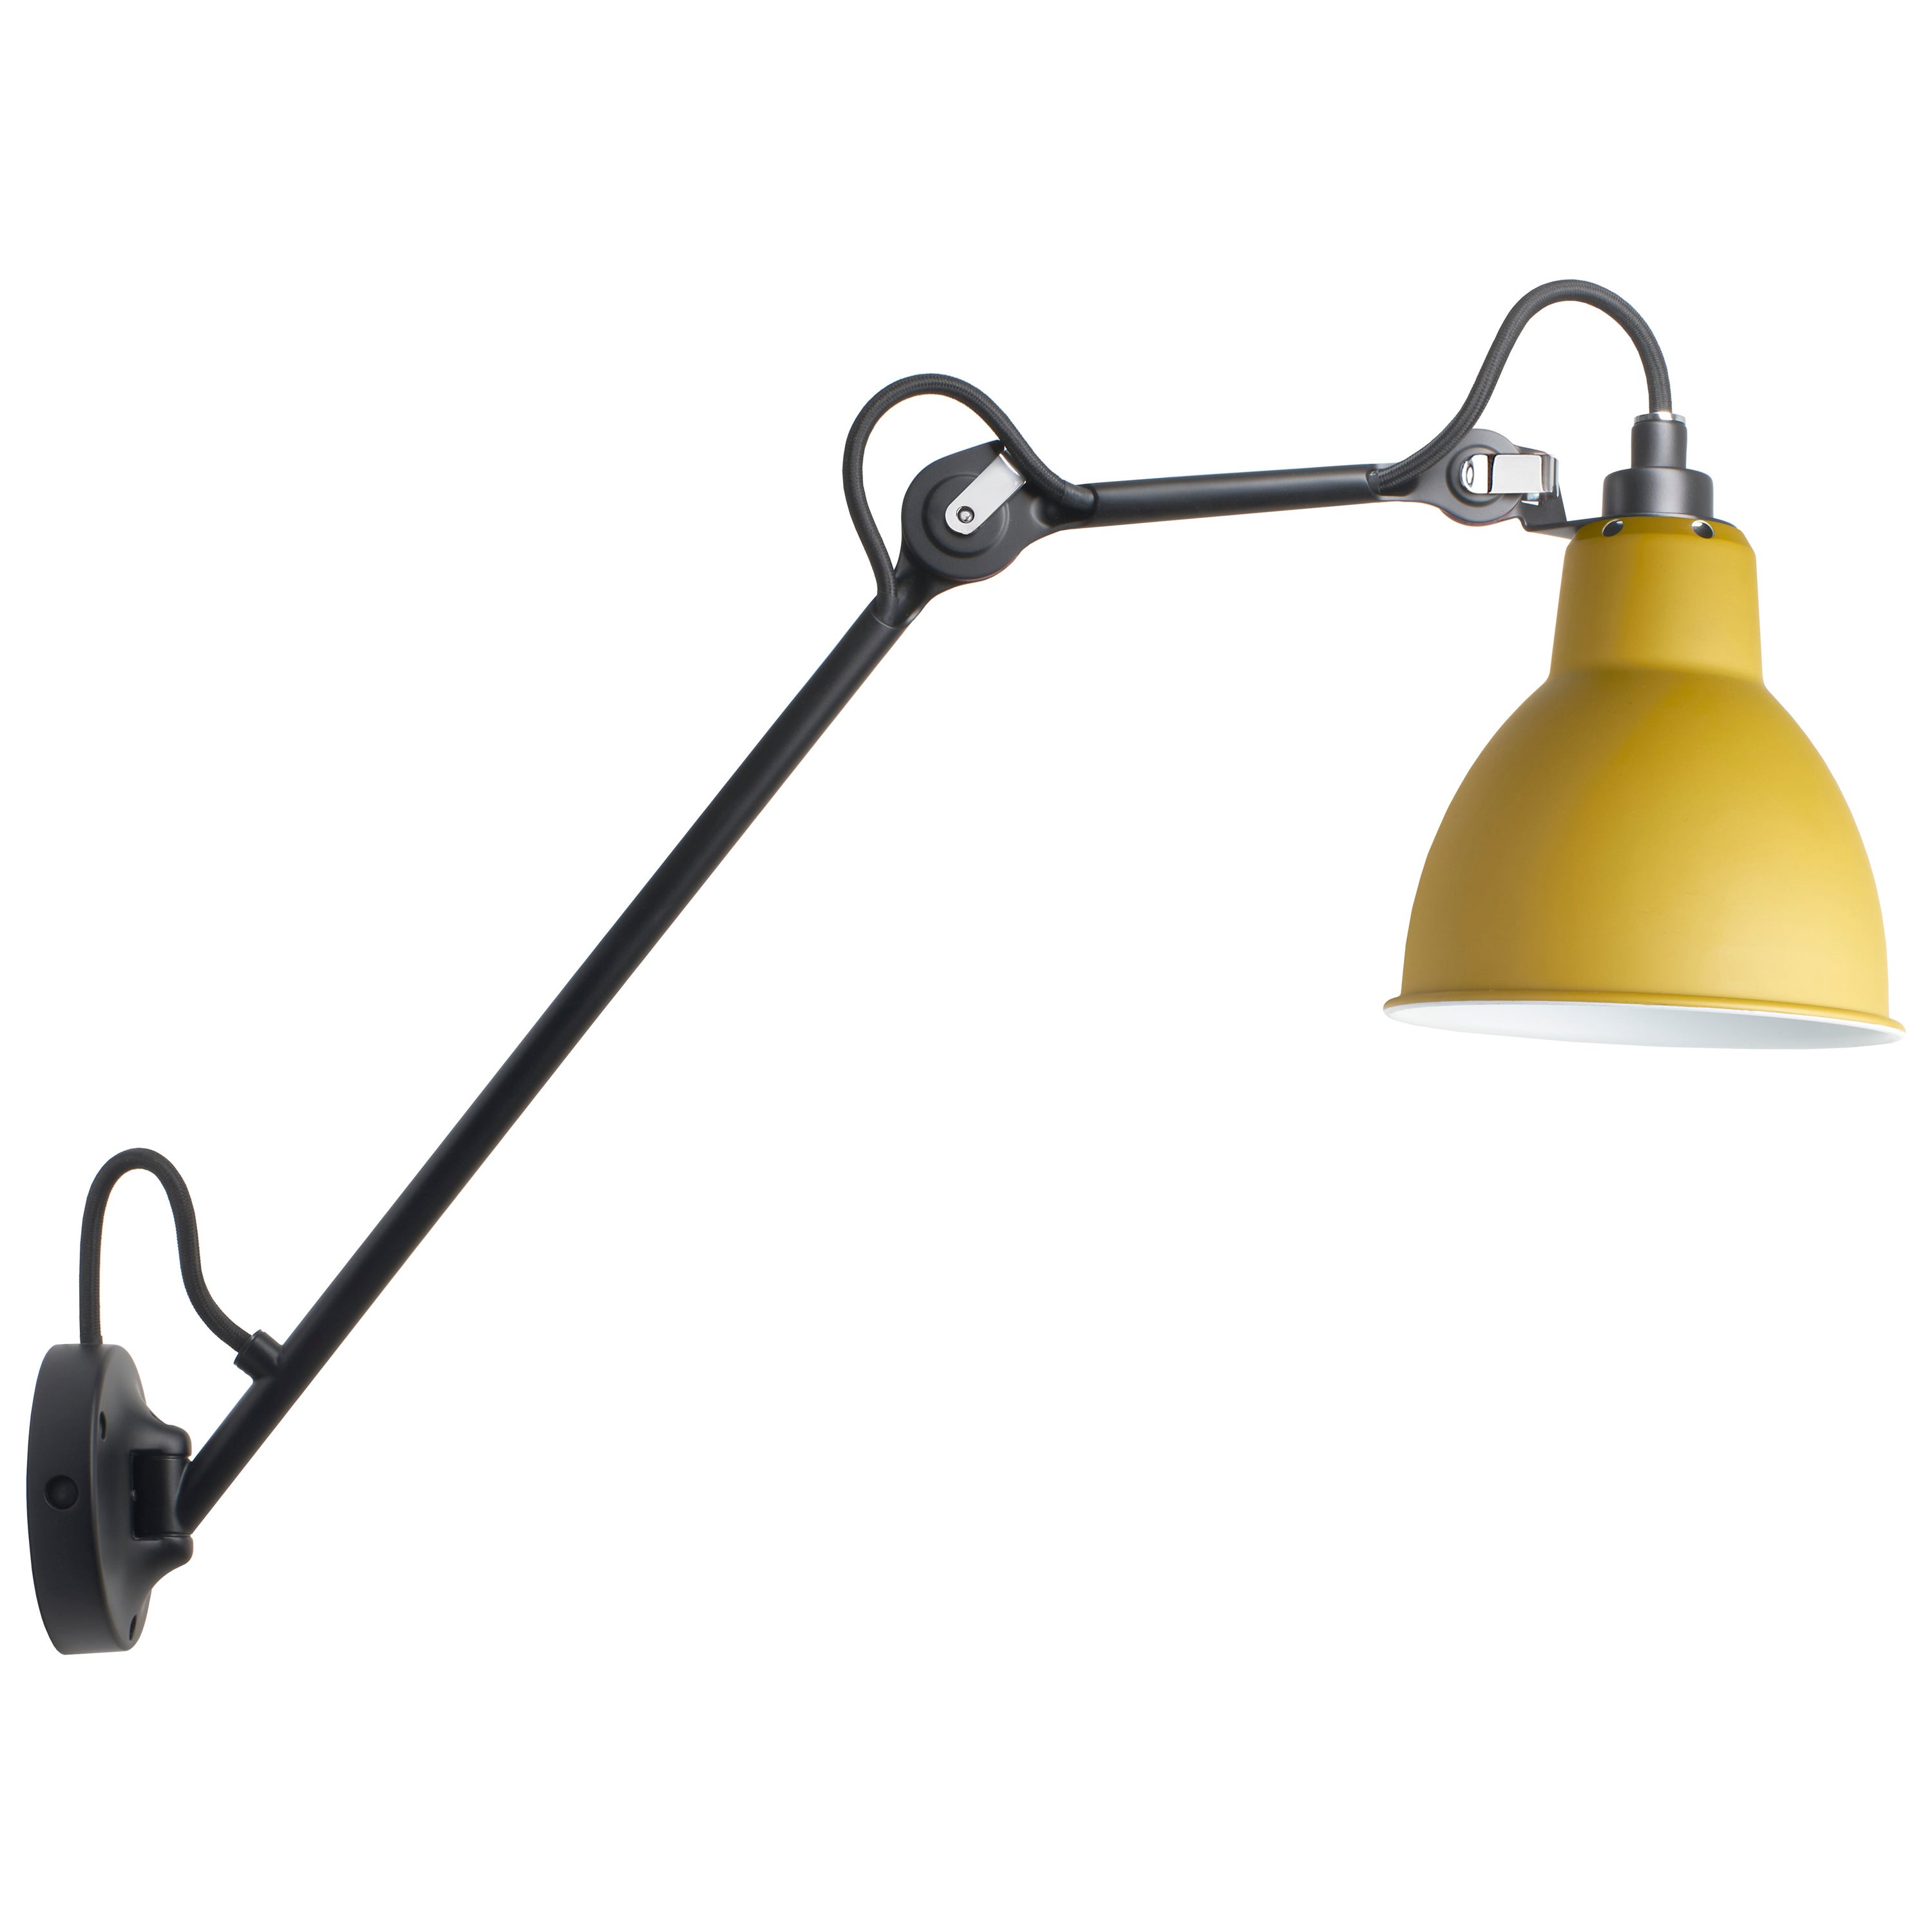 DCW Editions La Lampe Gras N°122 Wall Lamp in Black Arm and Yellow Shade For Sale